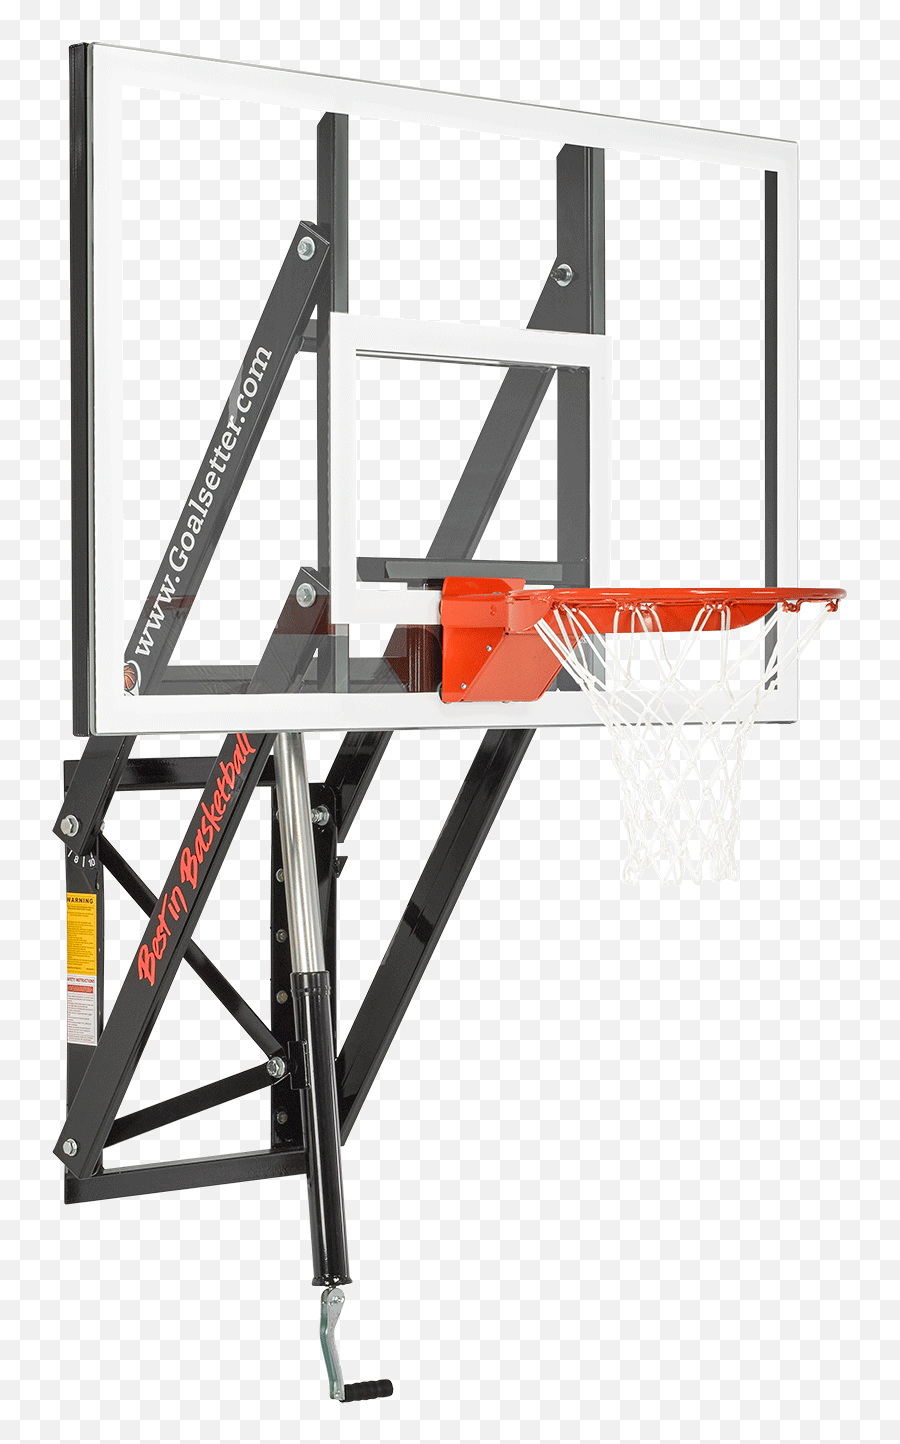 Gs60 Allows You To Mount The Basketball - Wall Mounted Basketball Hoops Png,Basketball Goal Png